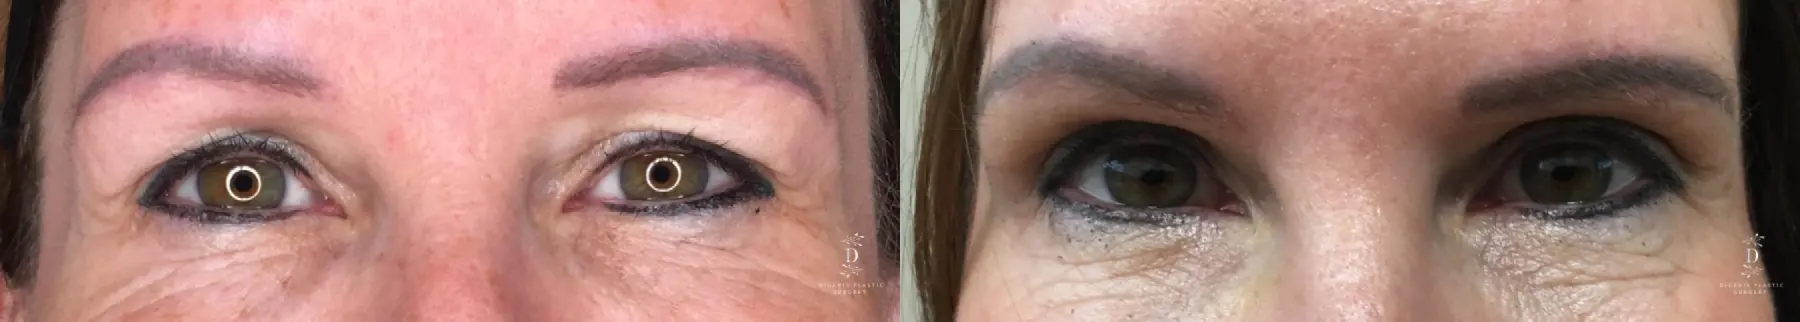 Eyelid Surgery: Patient 28 - Before and After 1